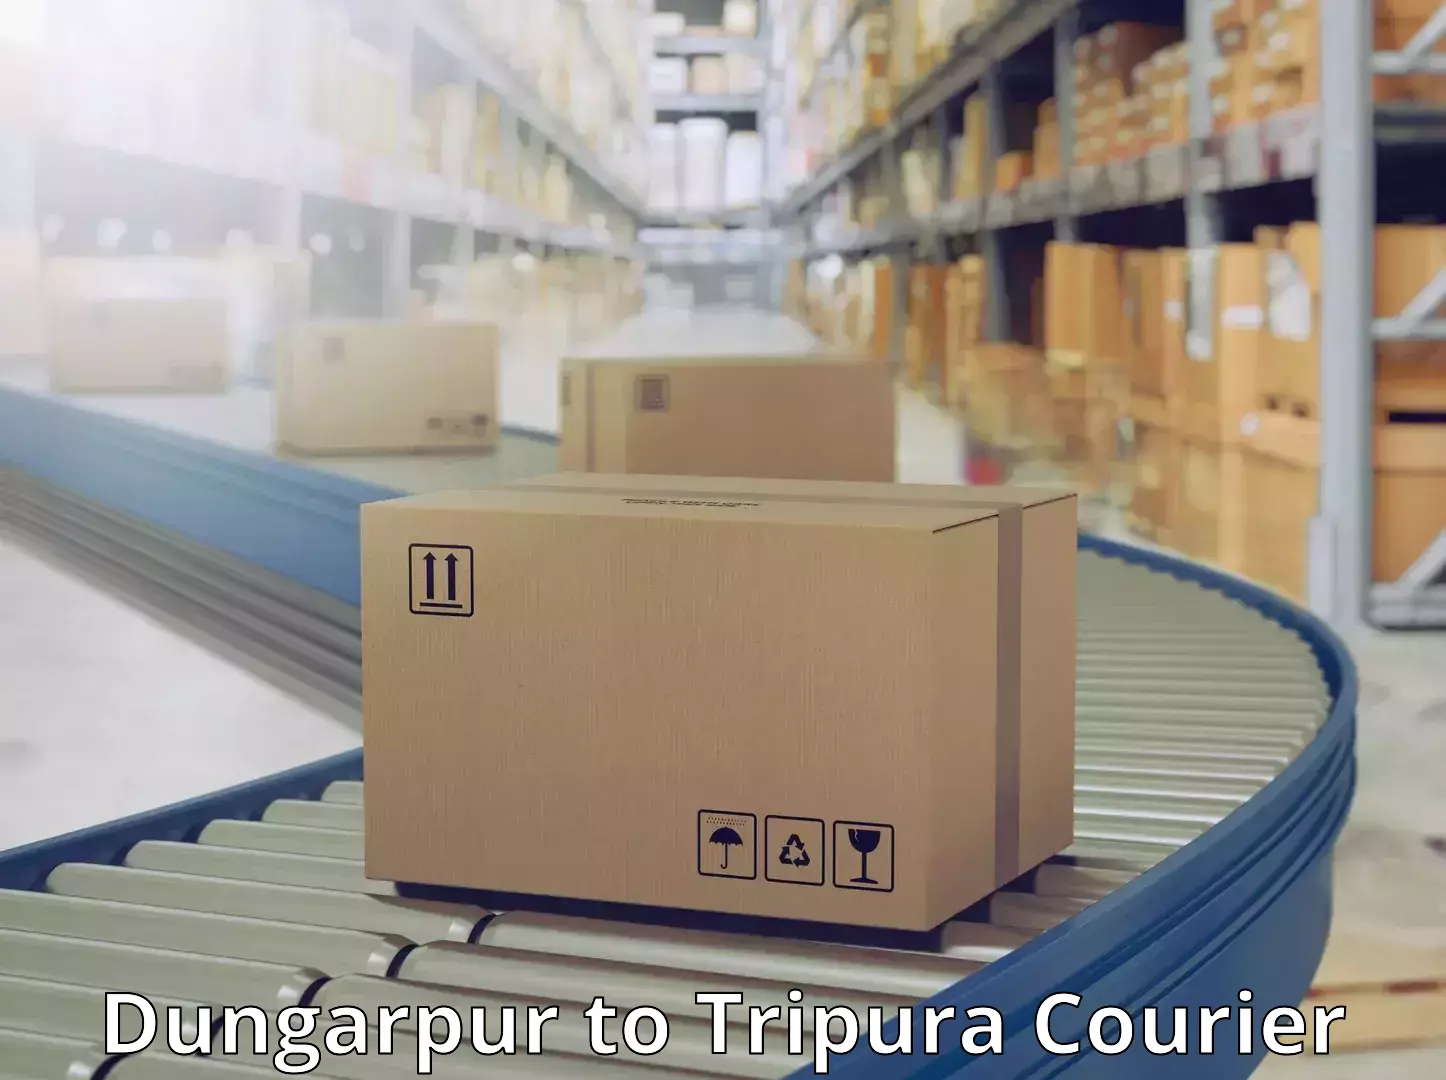 Weekend courier service Dungarpur to Tripura